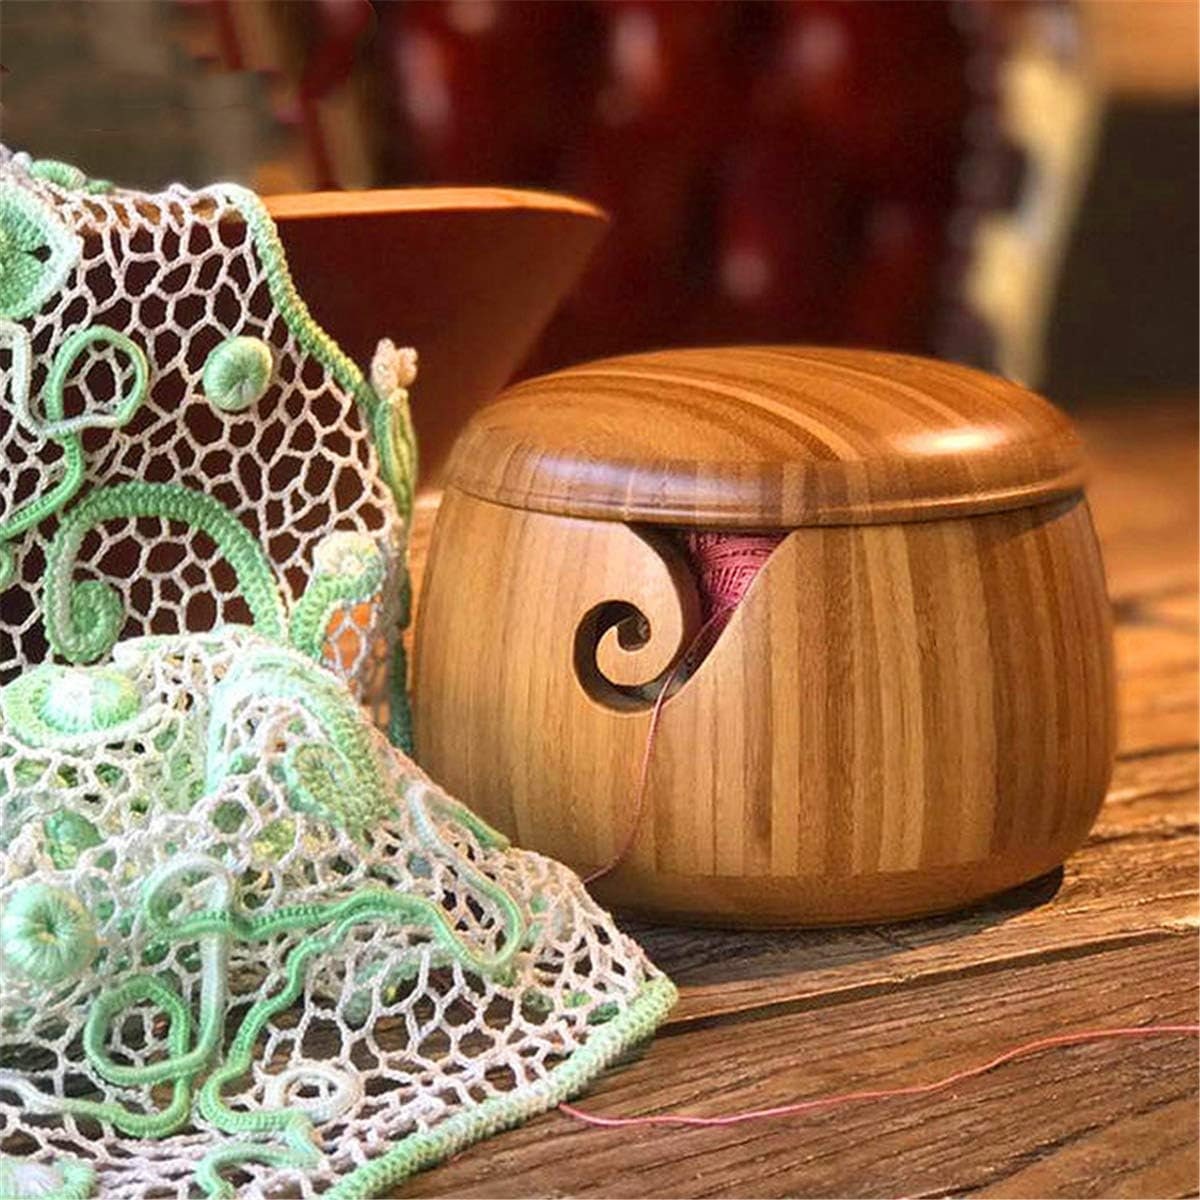 Yarn Bowl with Lid, Wooden Yarn Bowls for Crocheting with Carved Holes  Pattern Yarn Bowl for Crochet Knitting Crochet Accessories